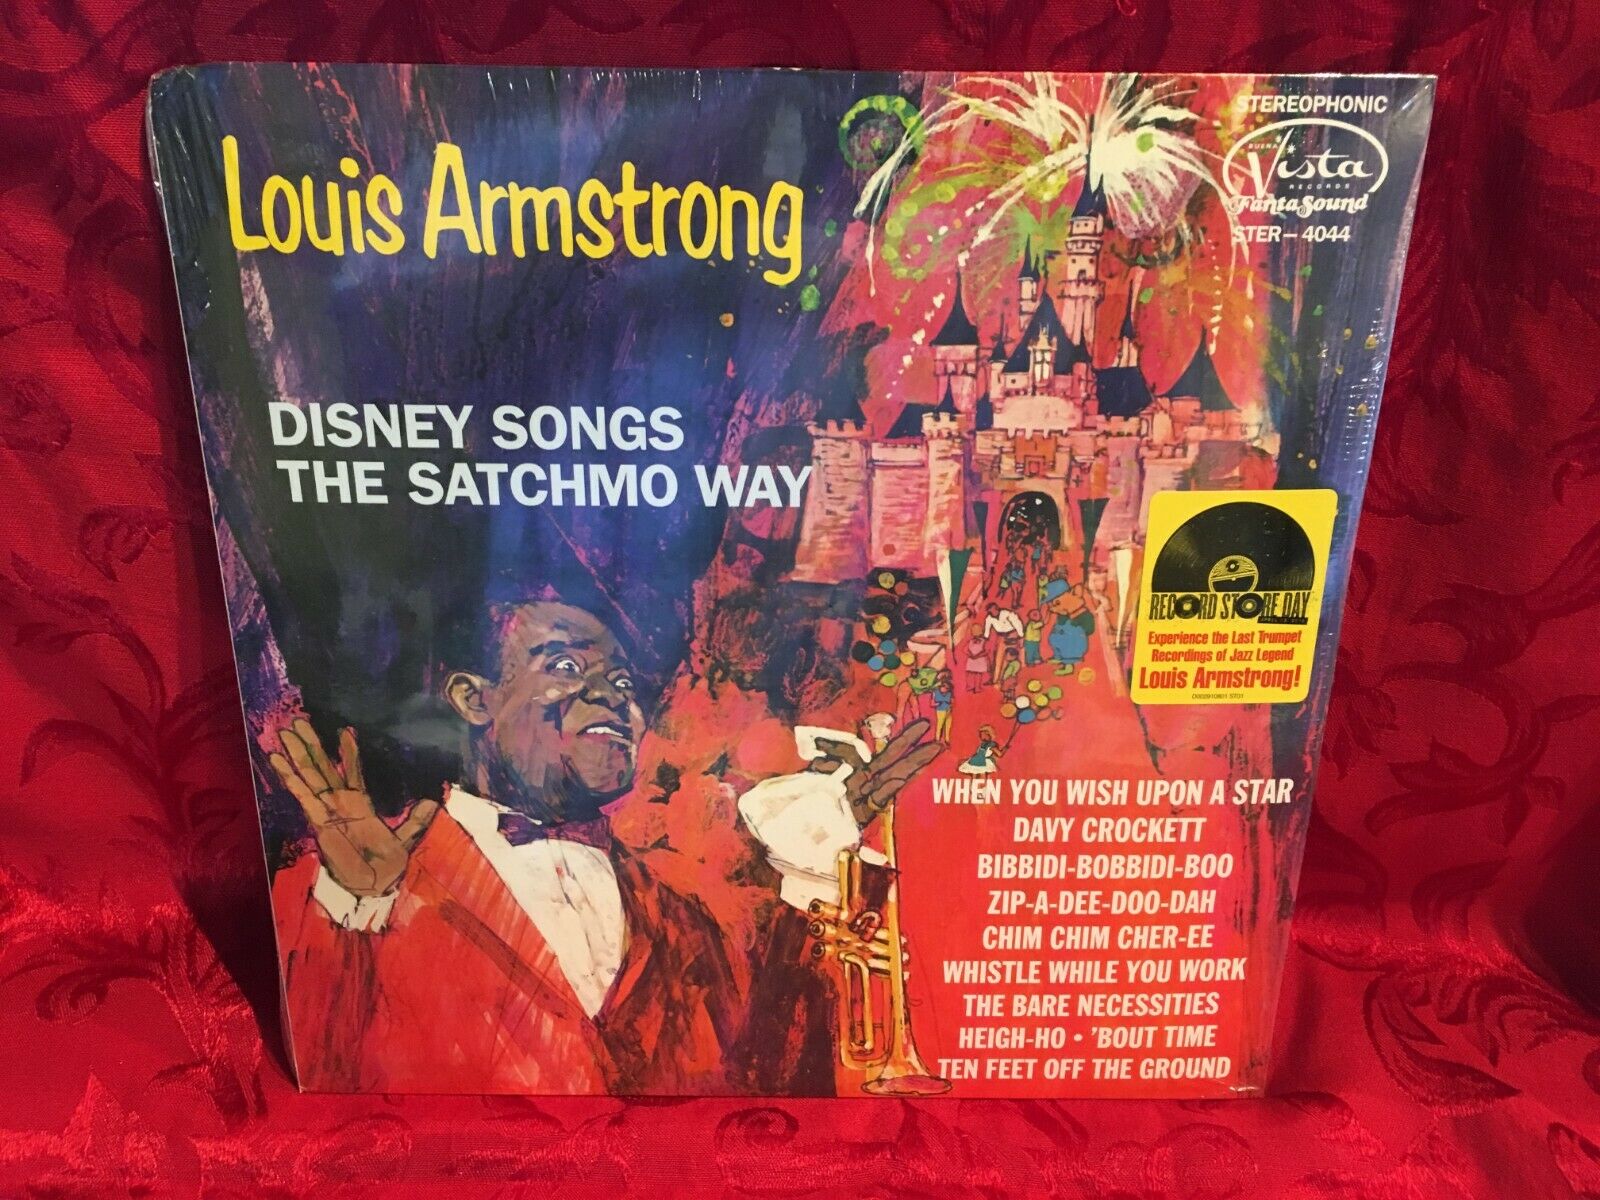 NEW RECORD STORE DAY 2019 LOUIS ARMSTRONG DISNEY SONGS THE SATCHMO WAY LP